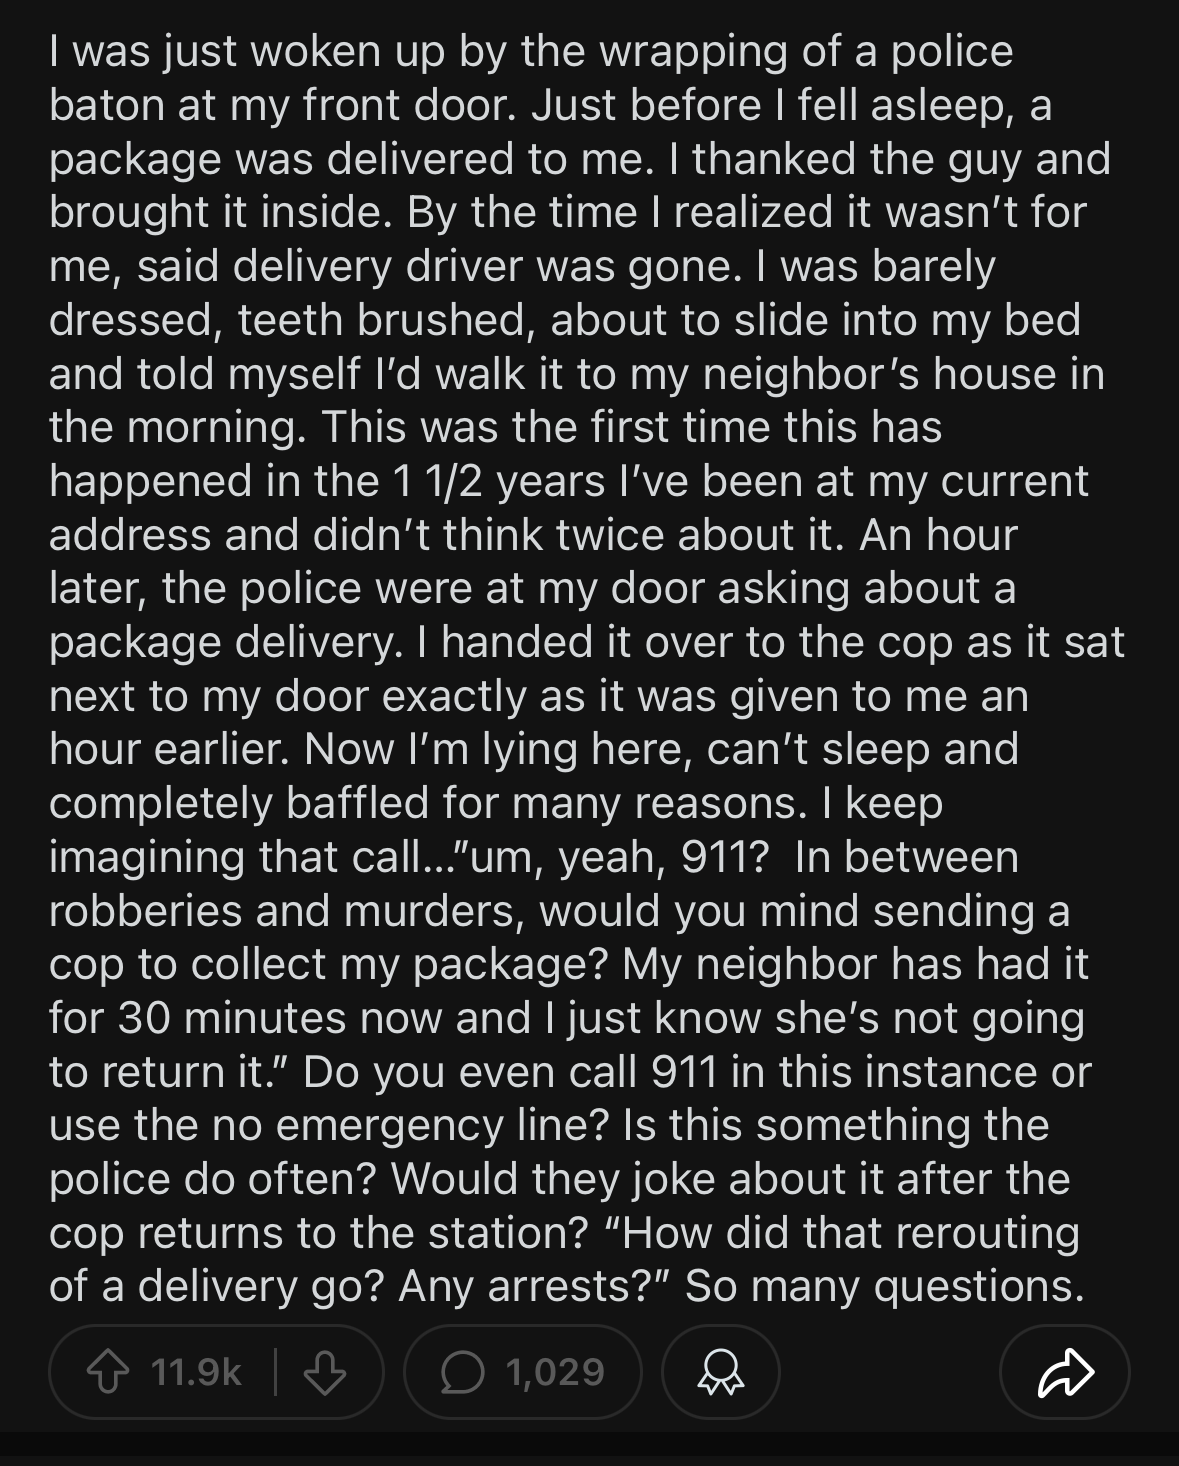 Screenshot of a Reddit post titled &quot;My neighbor called the police on my to collect a package.&quot; The post details an incident where the police were called over collecting a package. Commenters are discussing the situation